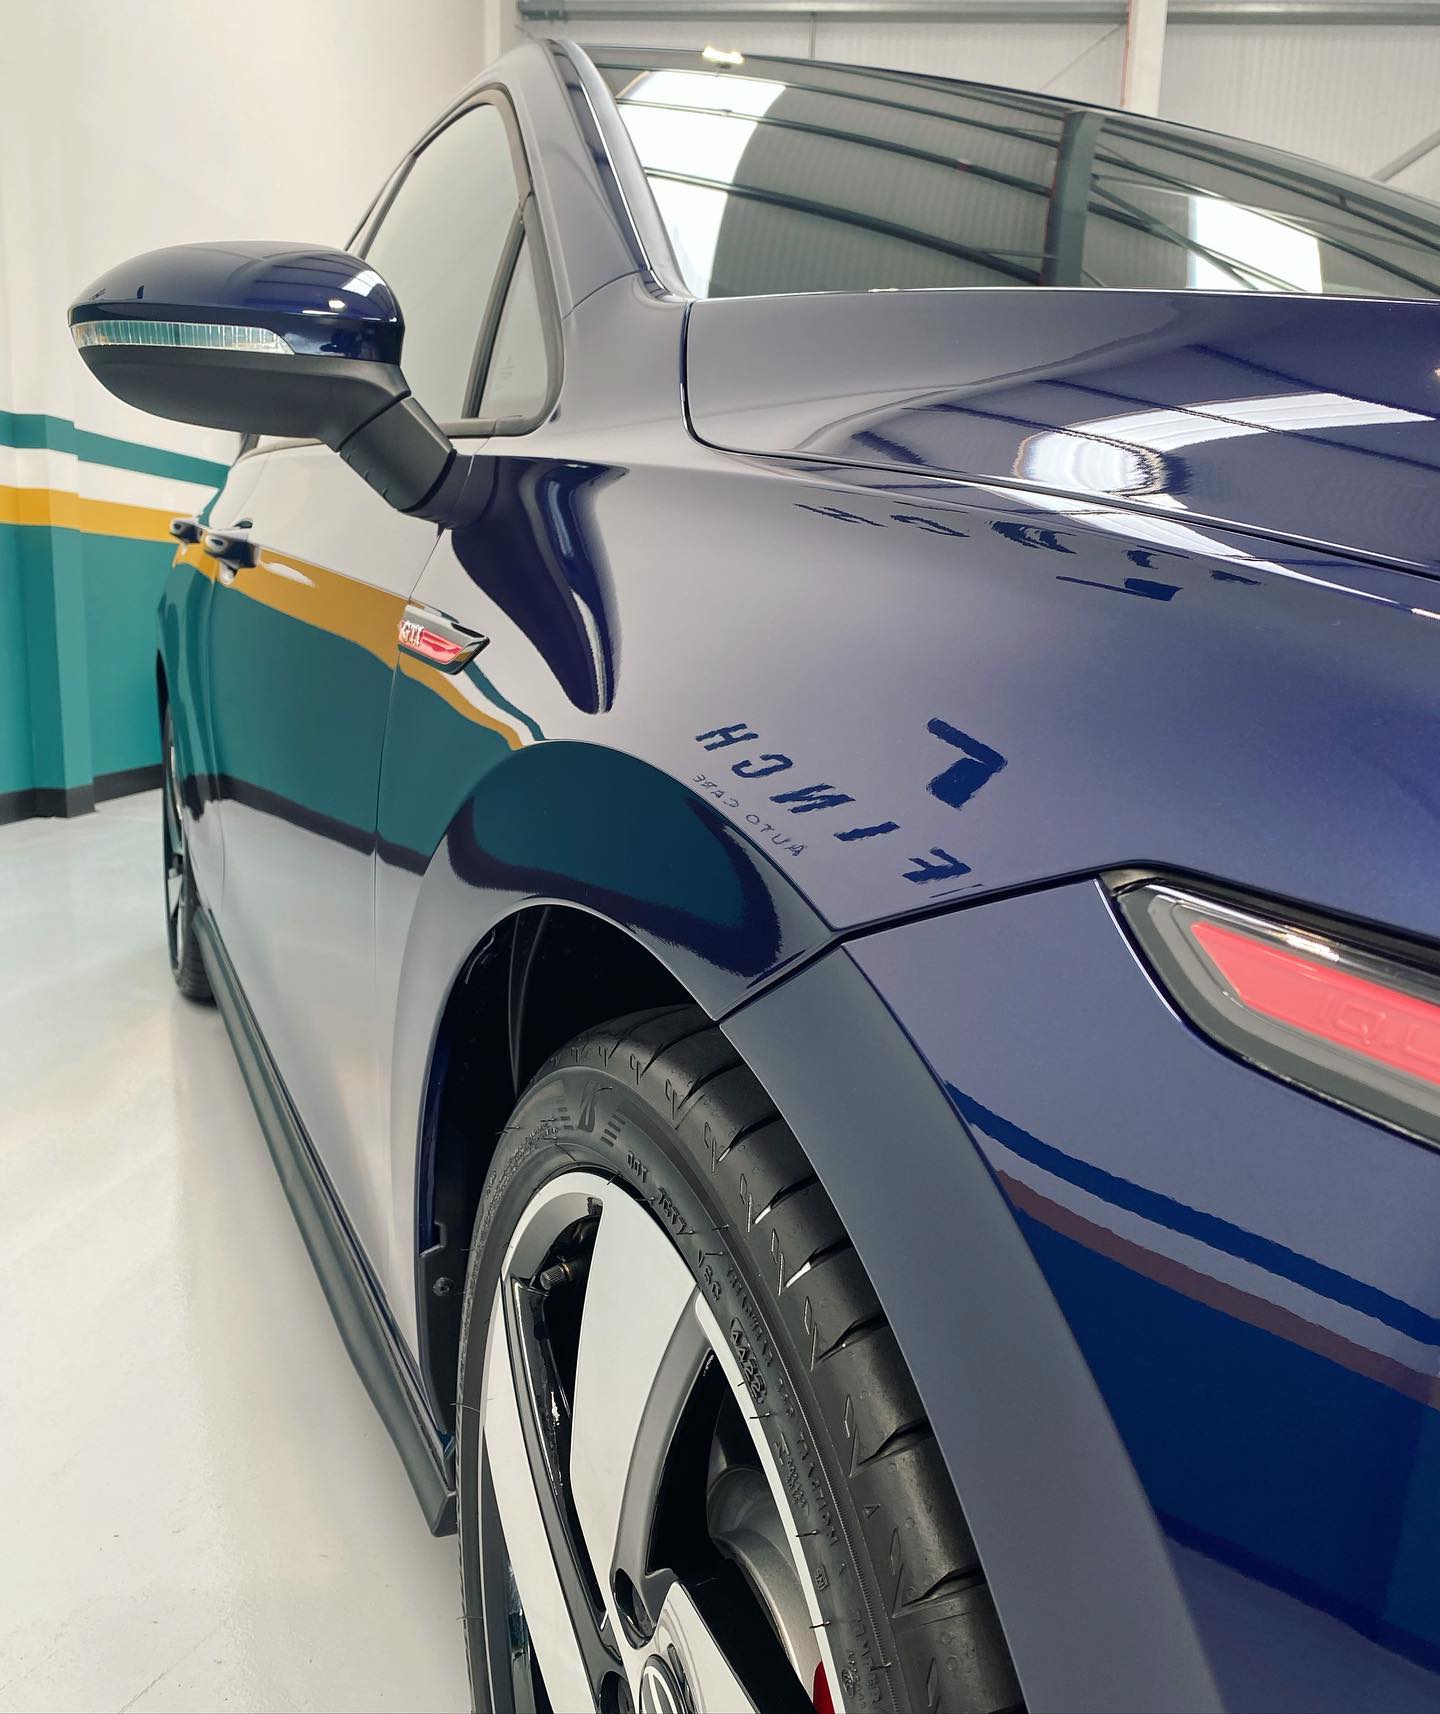 Side view of a blue electric car with aerodynamic design, highlighting the rear mirror and wheel.